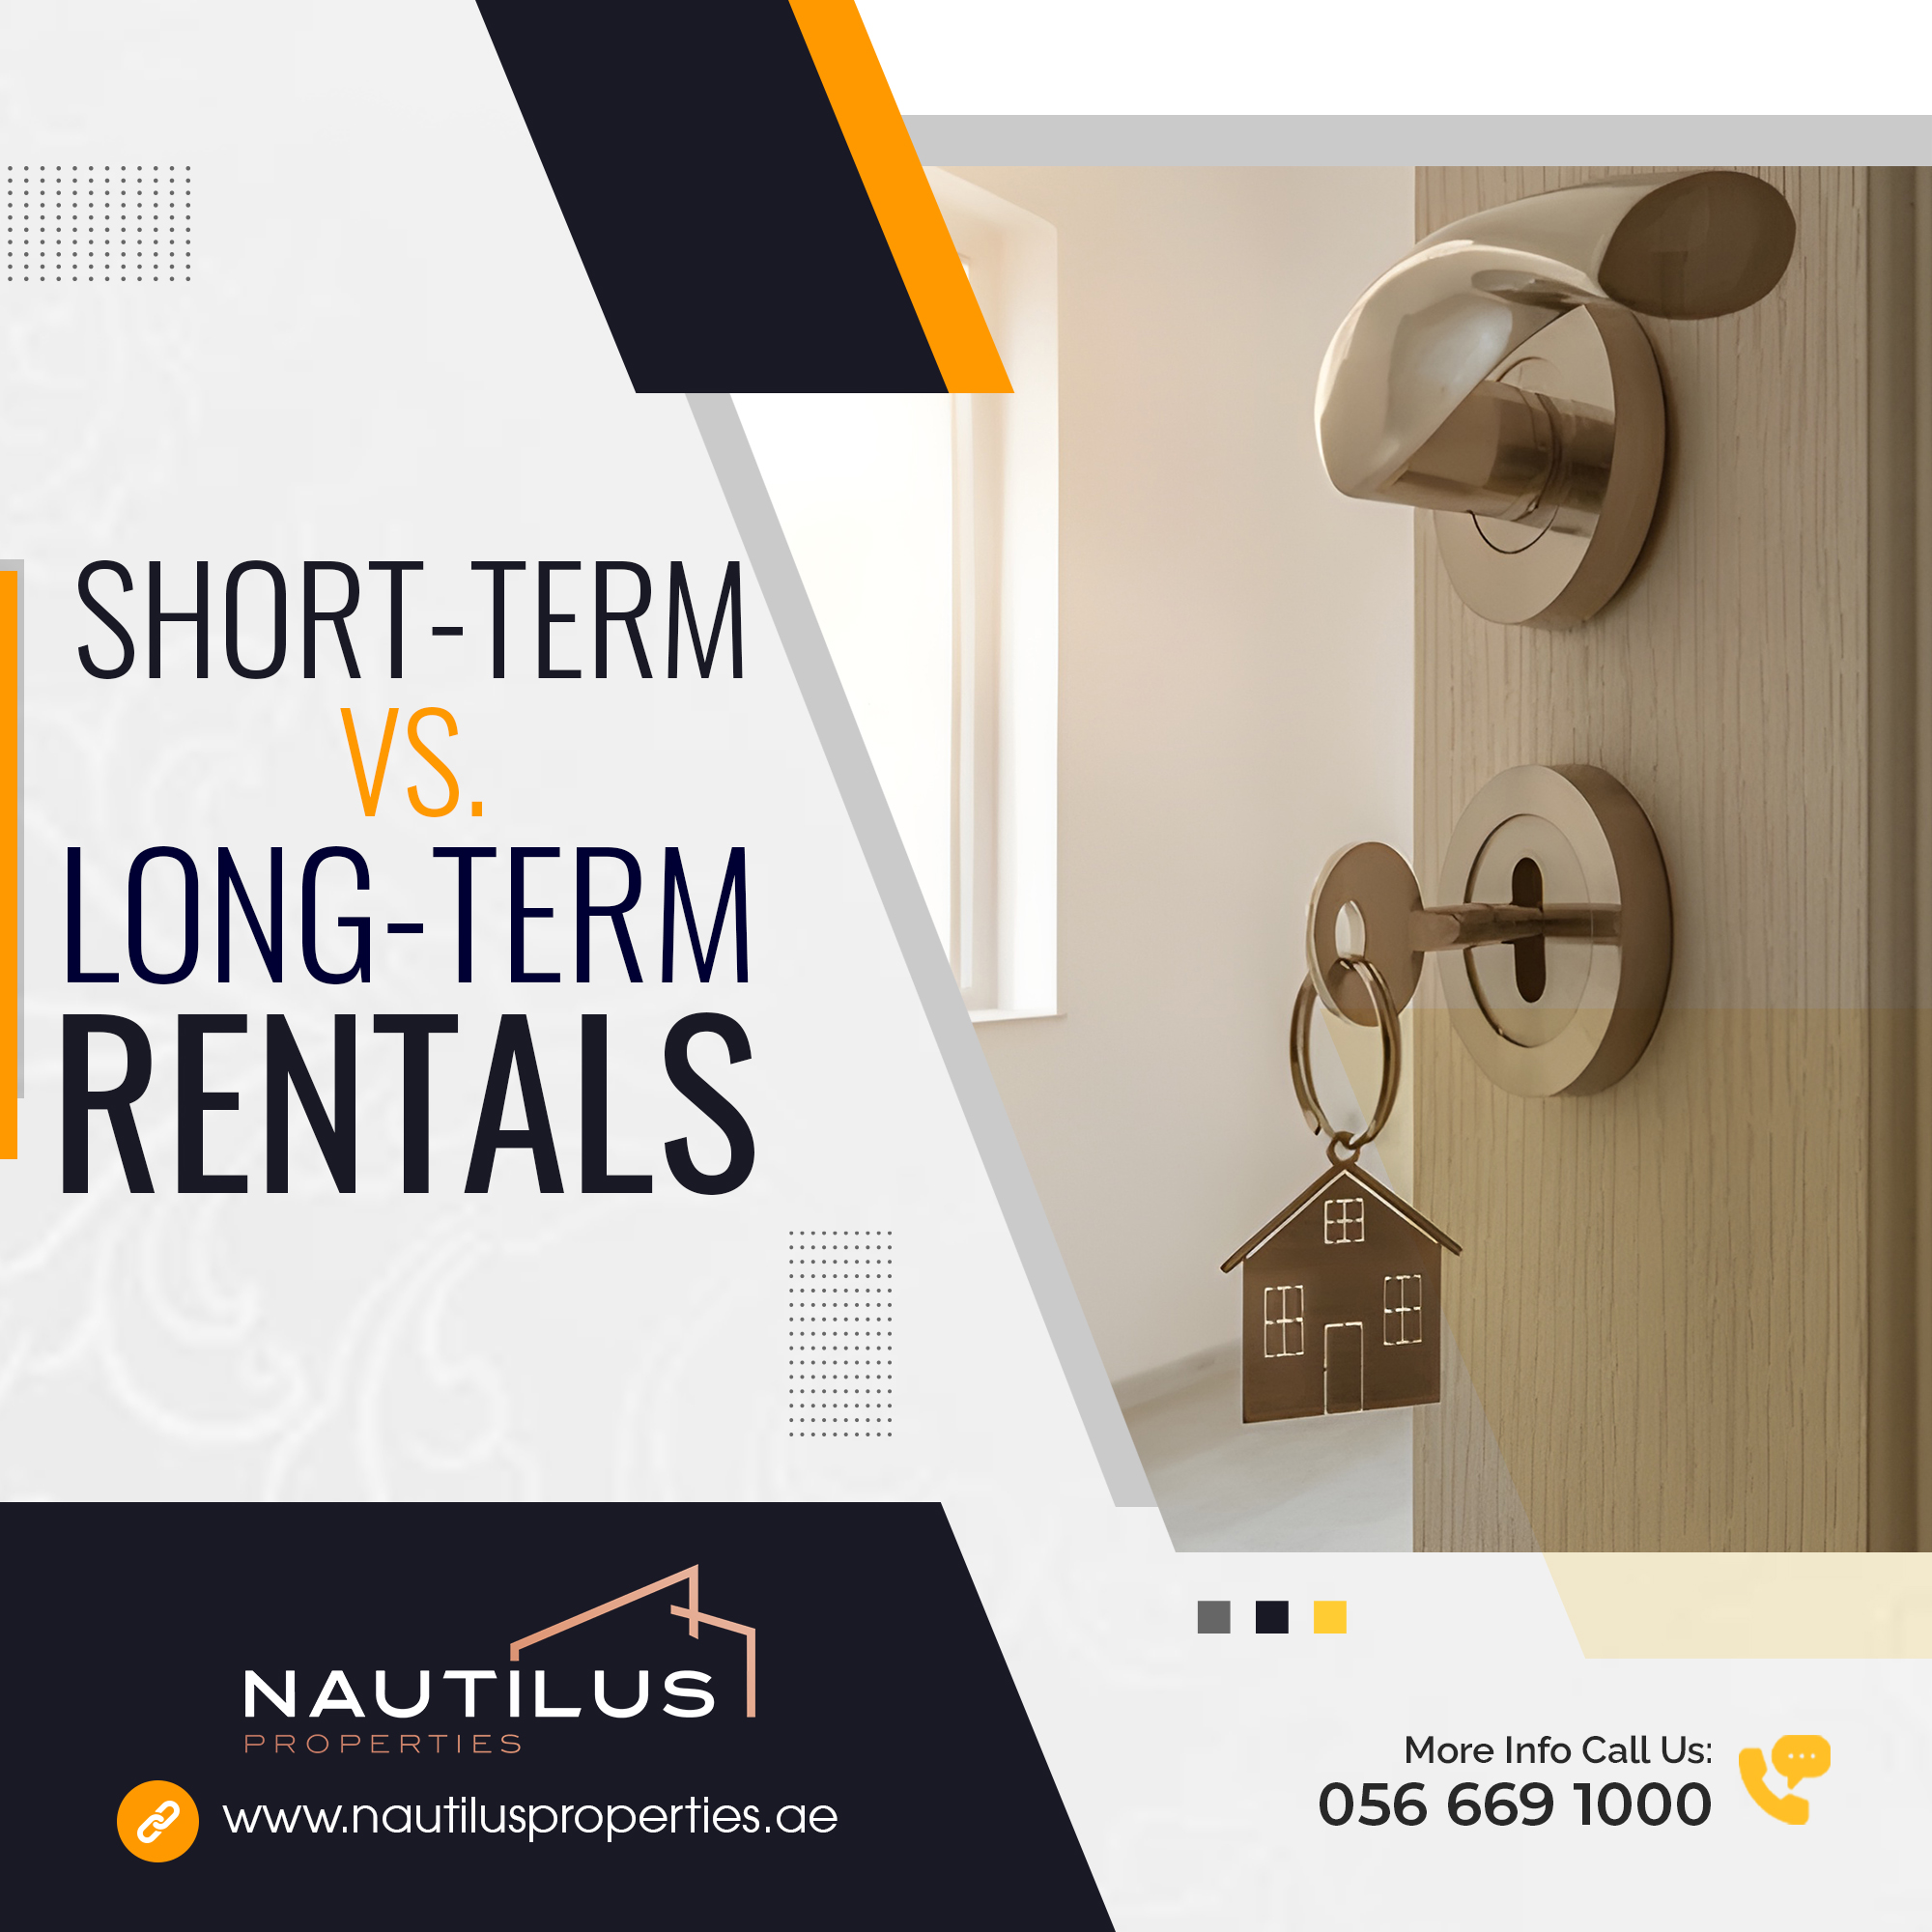 Graphic comparing short-term vs. long-term rentals with a door key in focus, symbolizing the entry to new living options.